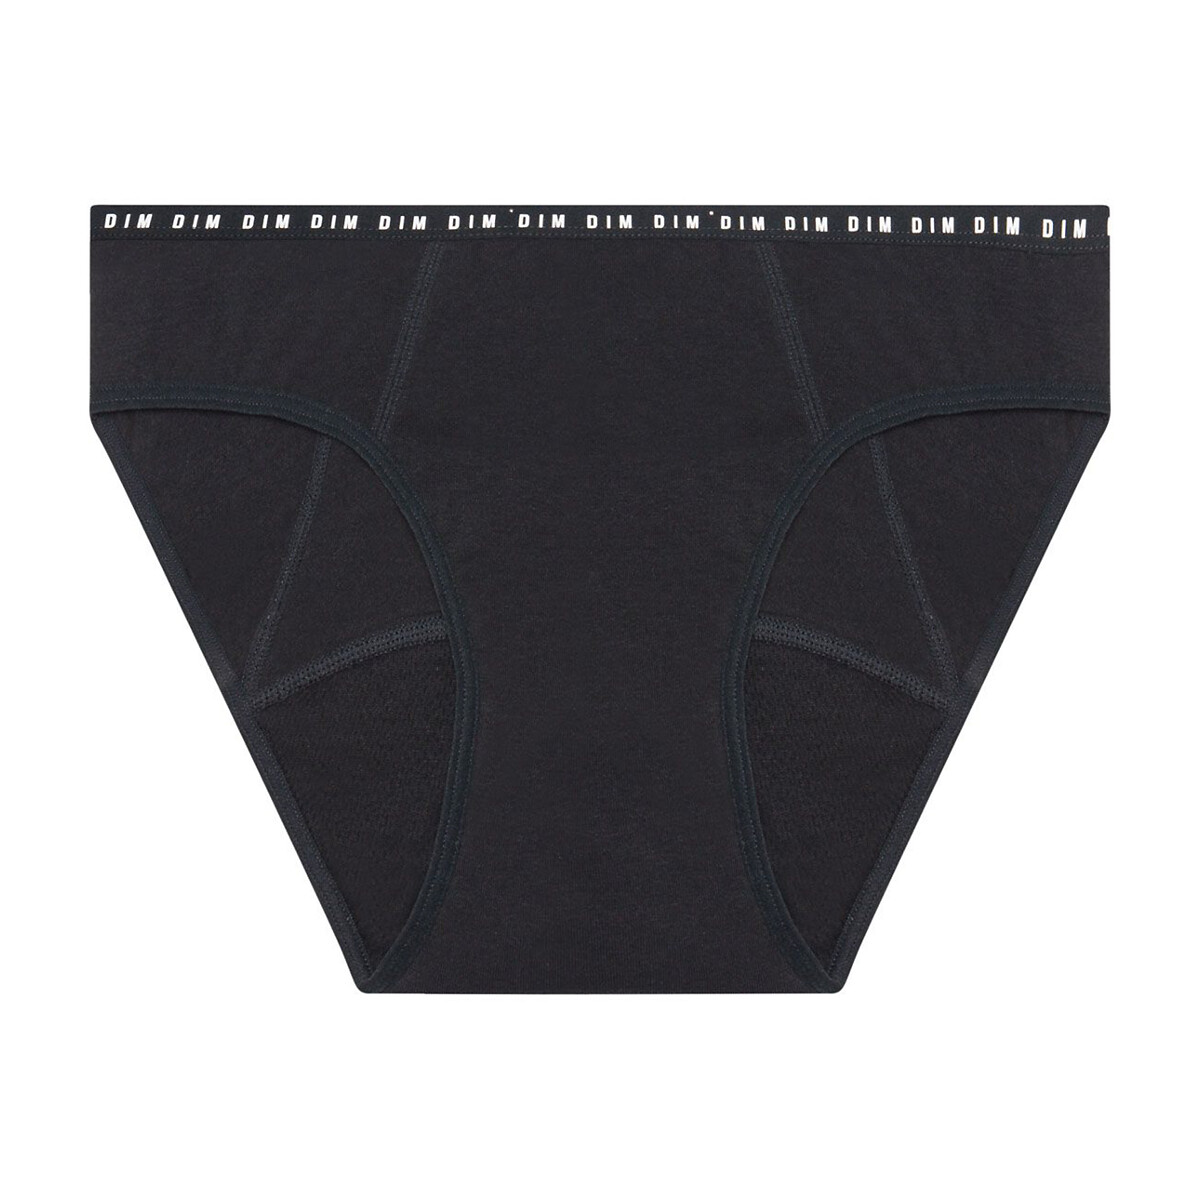 Heavy Flow Period Knickers in Cotton Mix